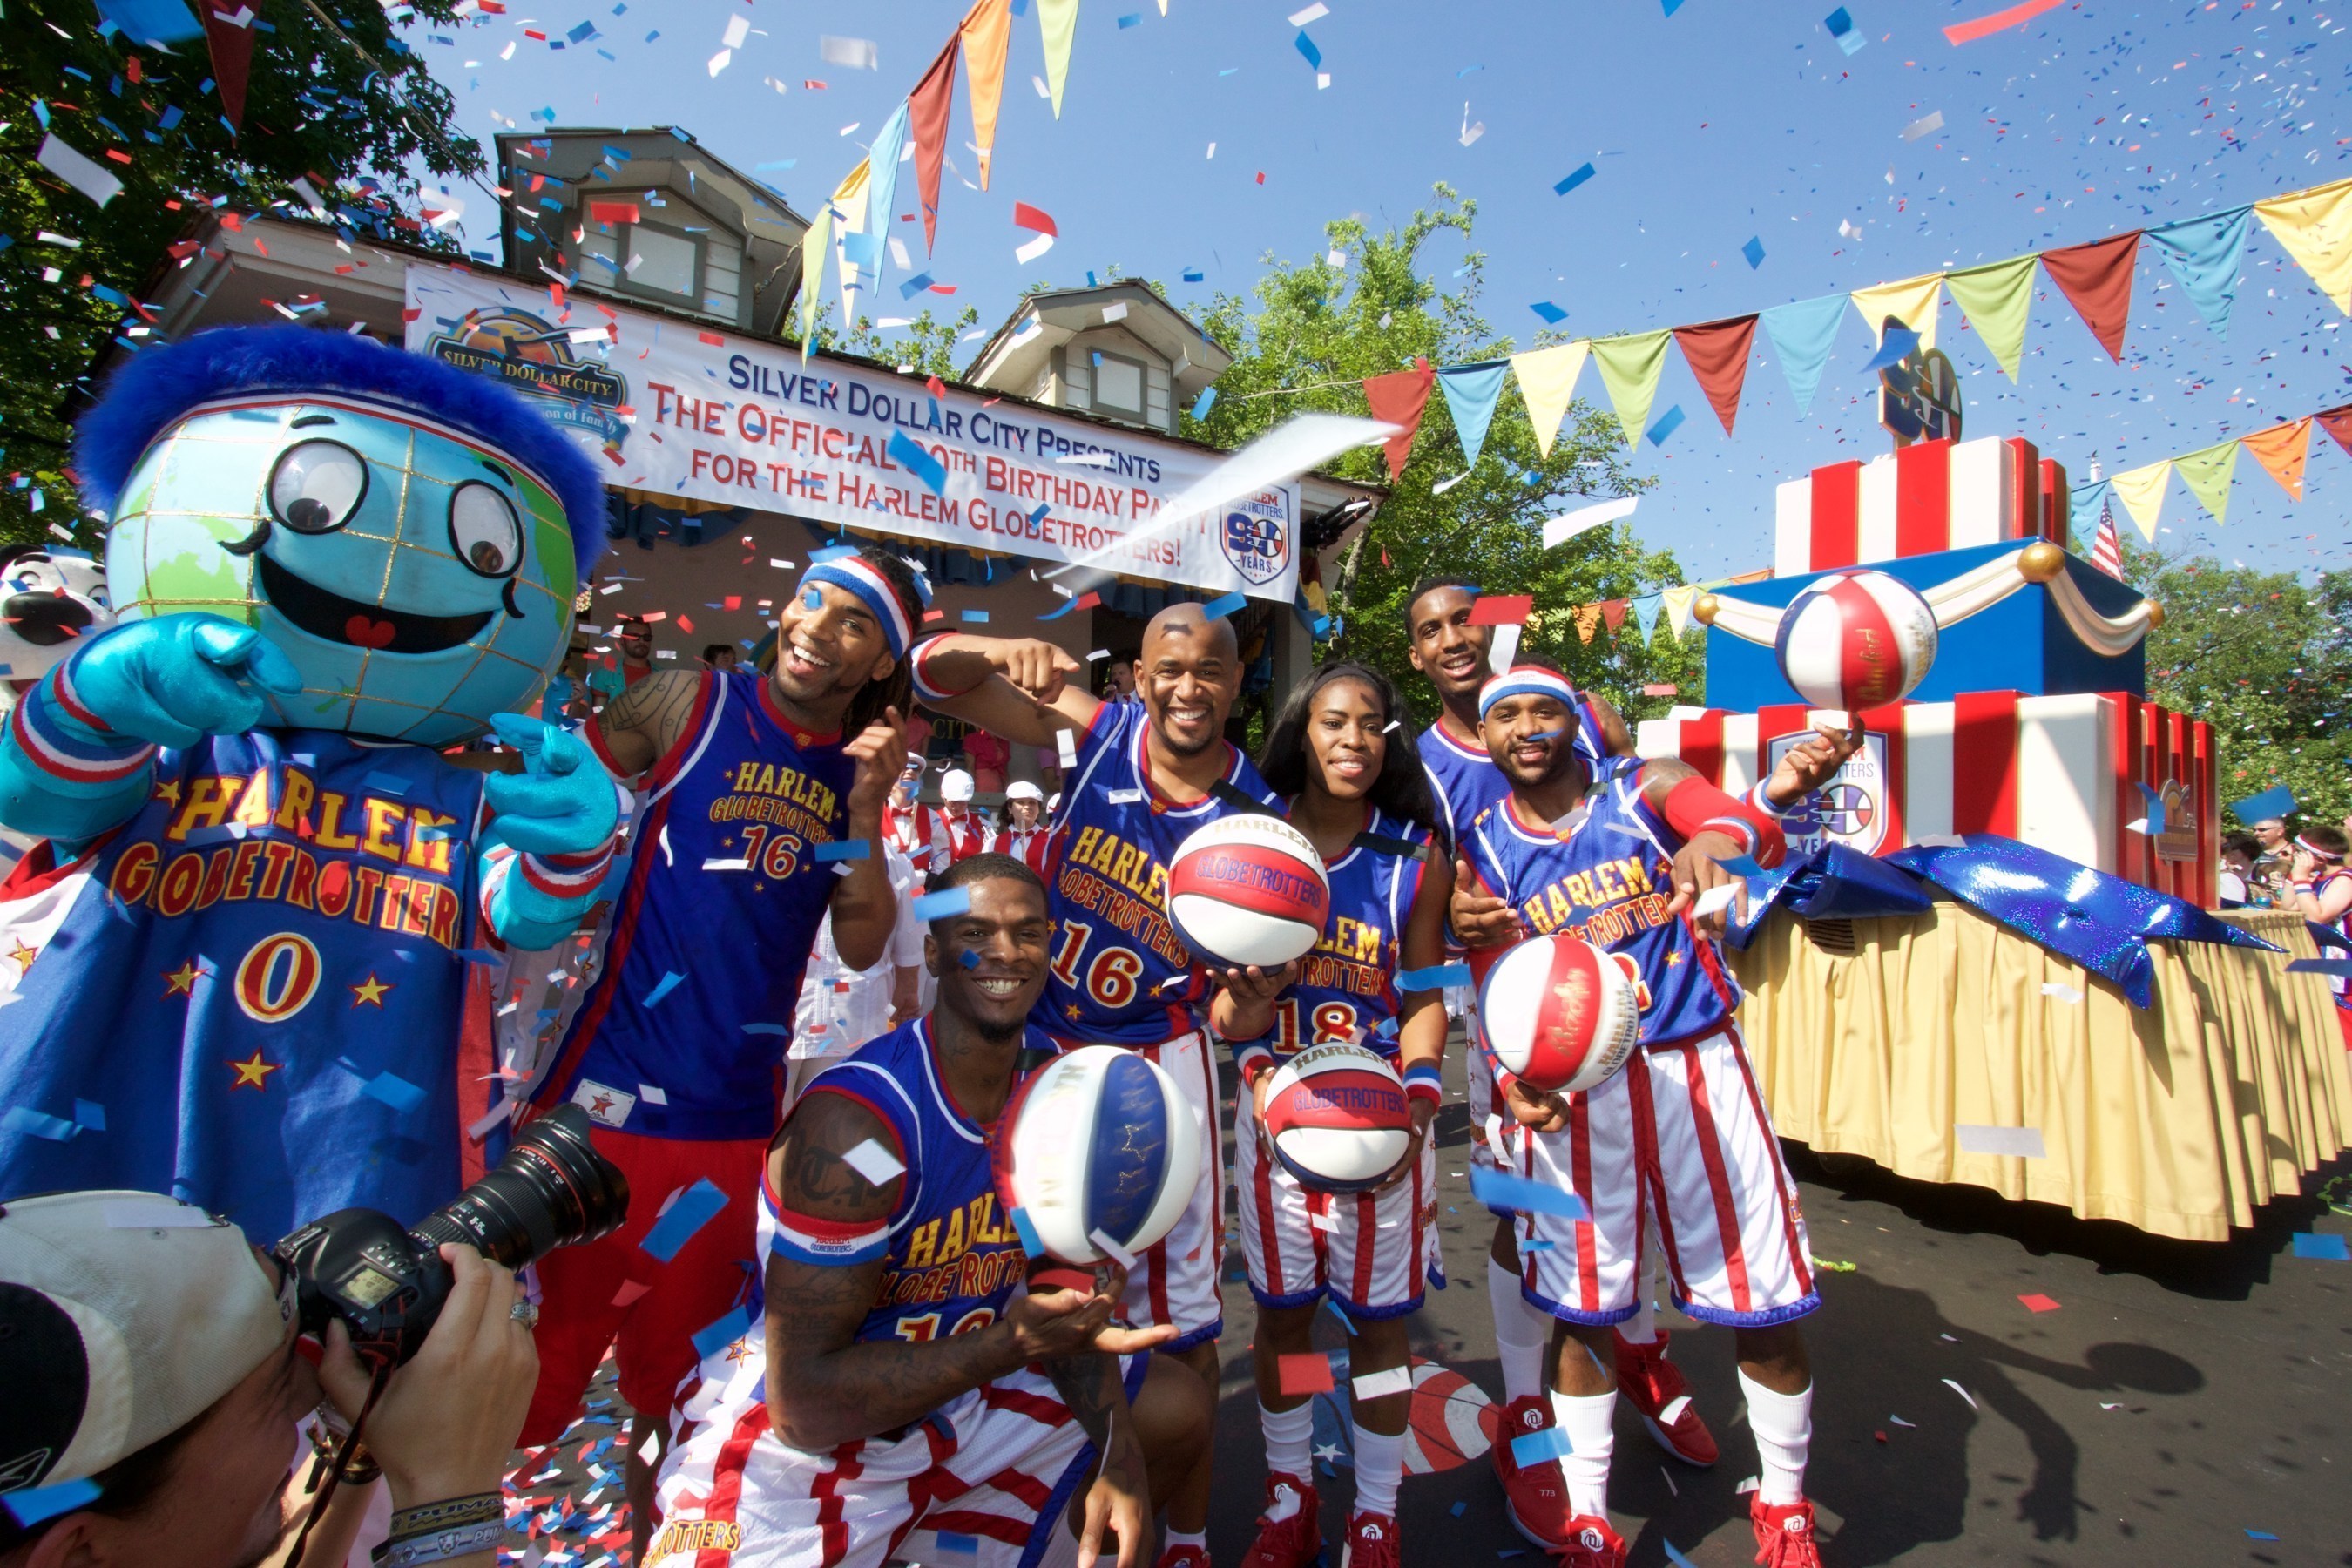 The Harlem Globetrotters celebrate their 90th Birthday with a 12-foot tall birthday cake, a marching band and performers at Silver Dollar City in Branson, Missouri.